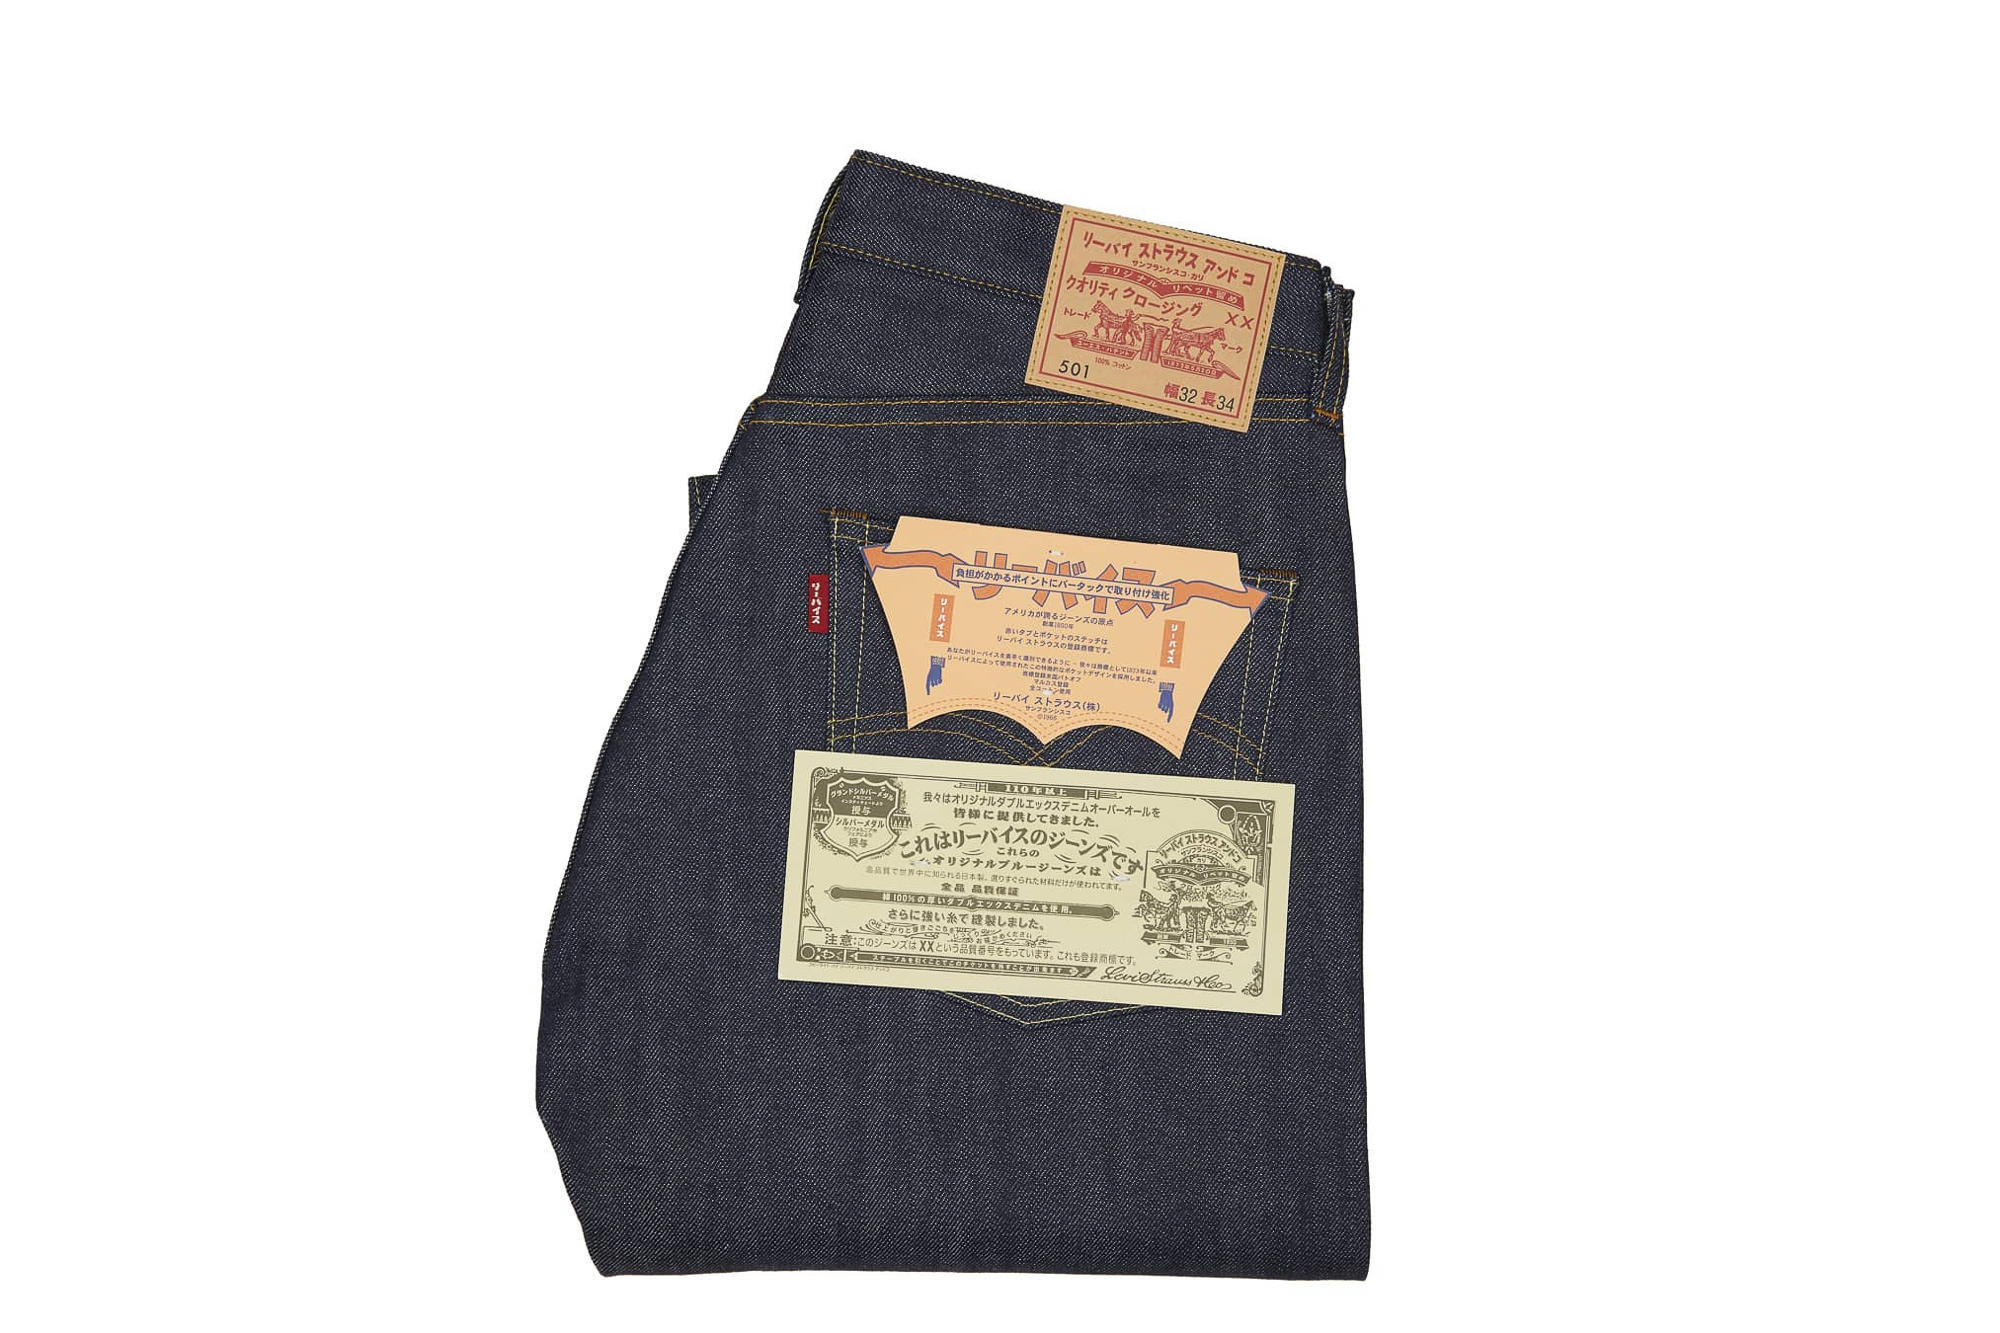 Levi's Vintage Clothing Releases Limited Edition 1937 All Japan